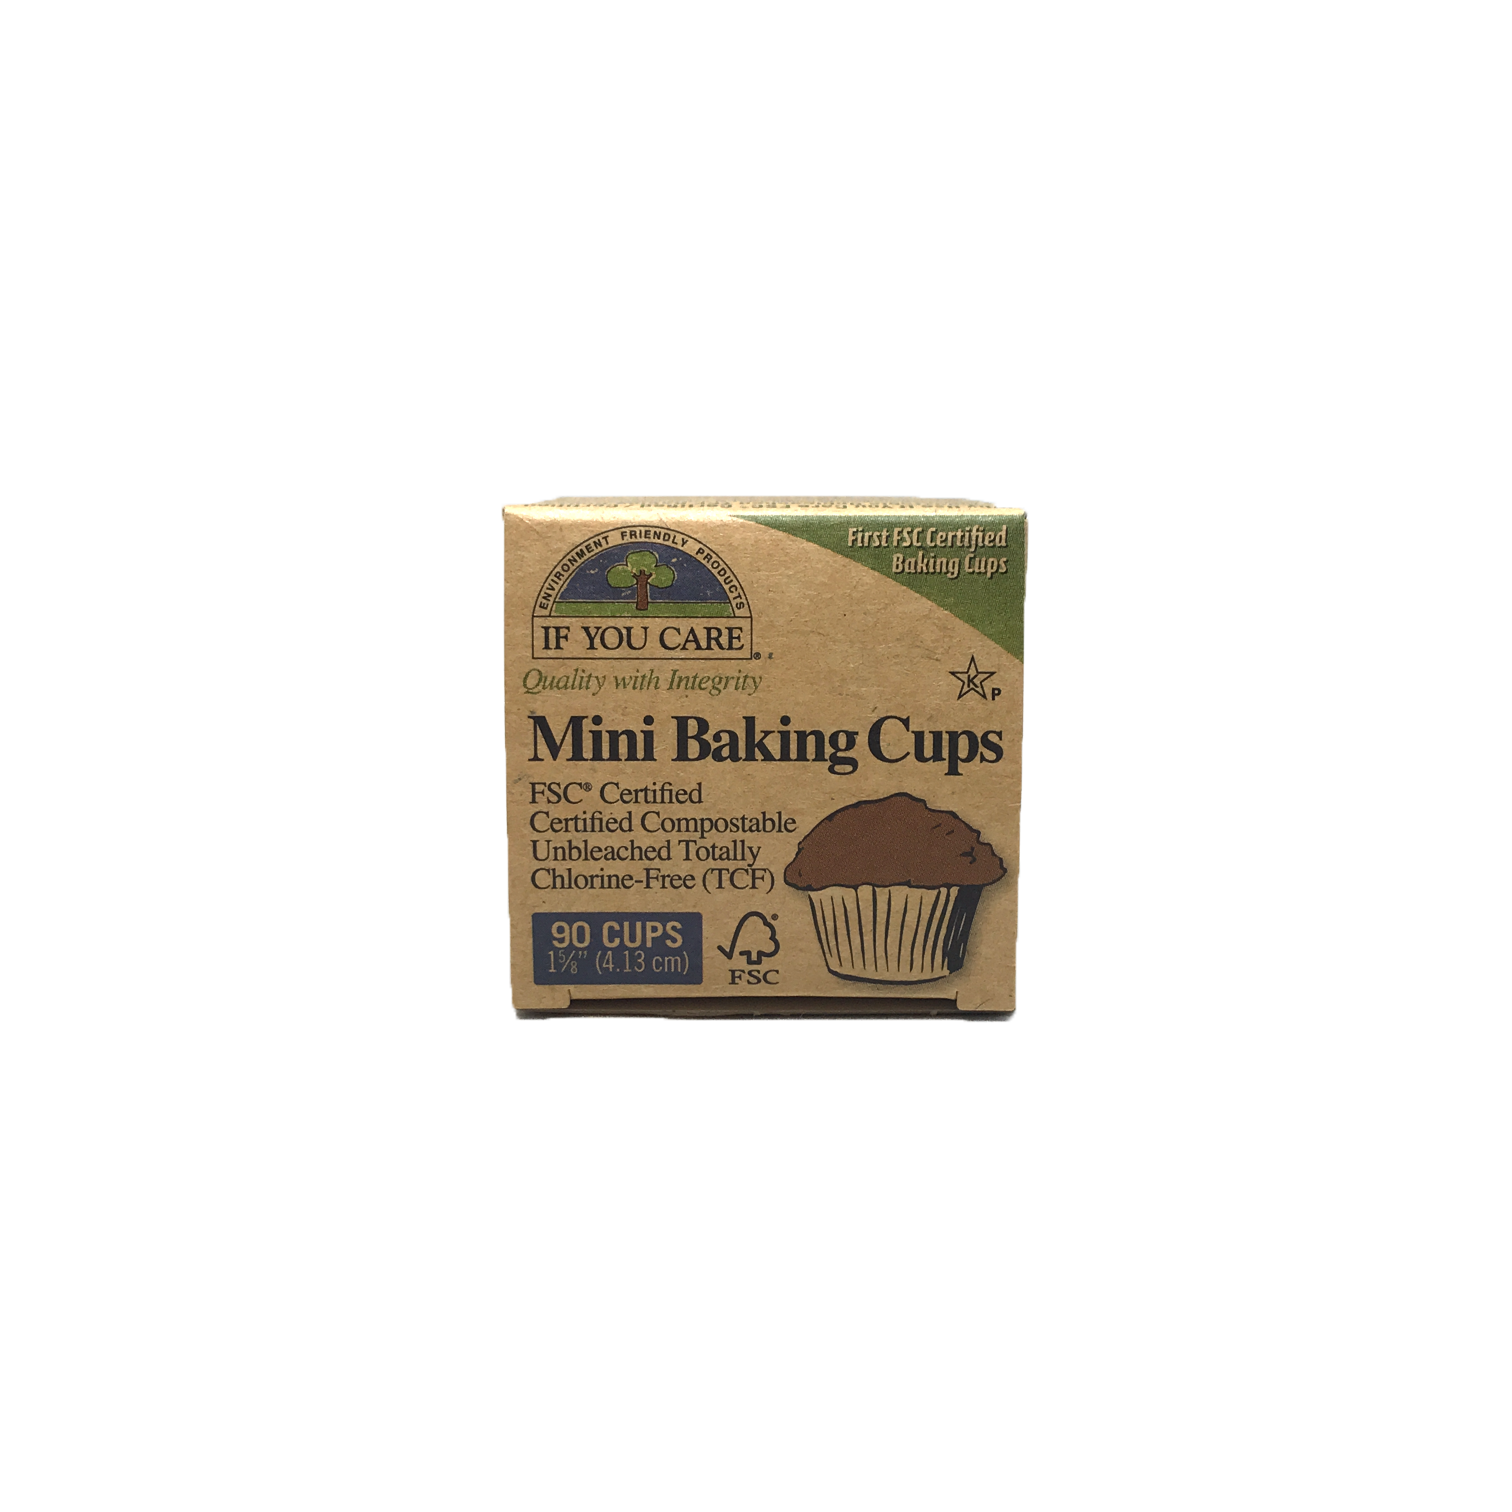 If You Care Unbleached Mini Baking Cups 90 Cups